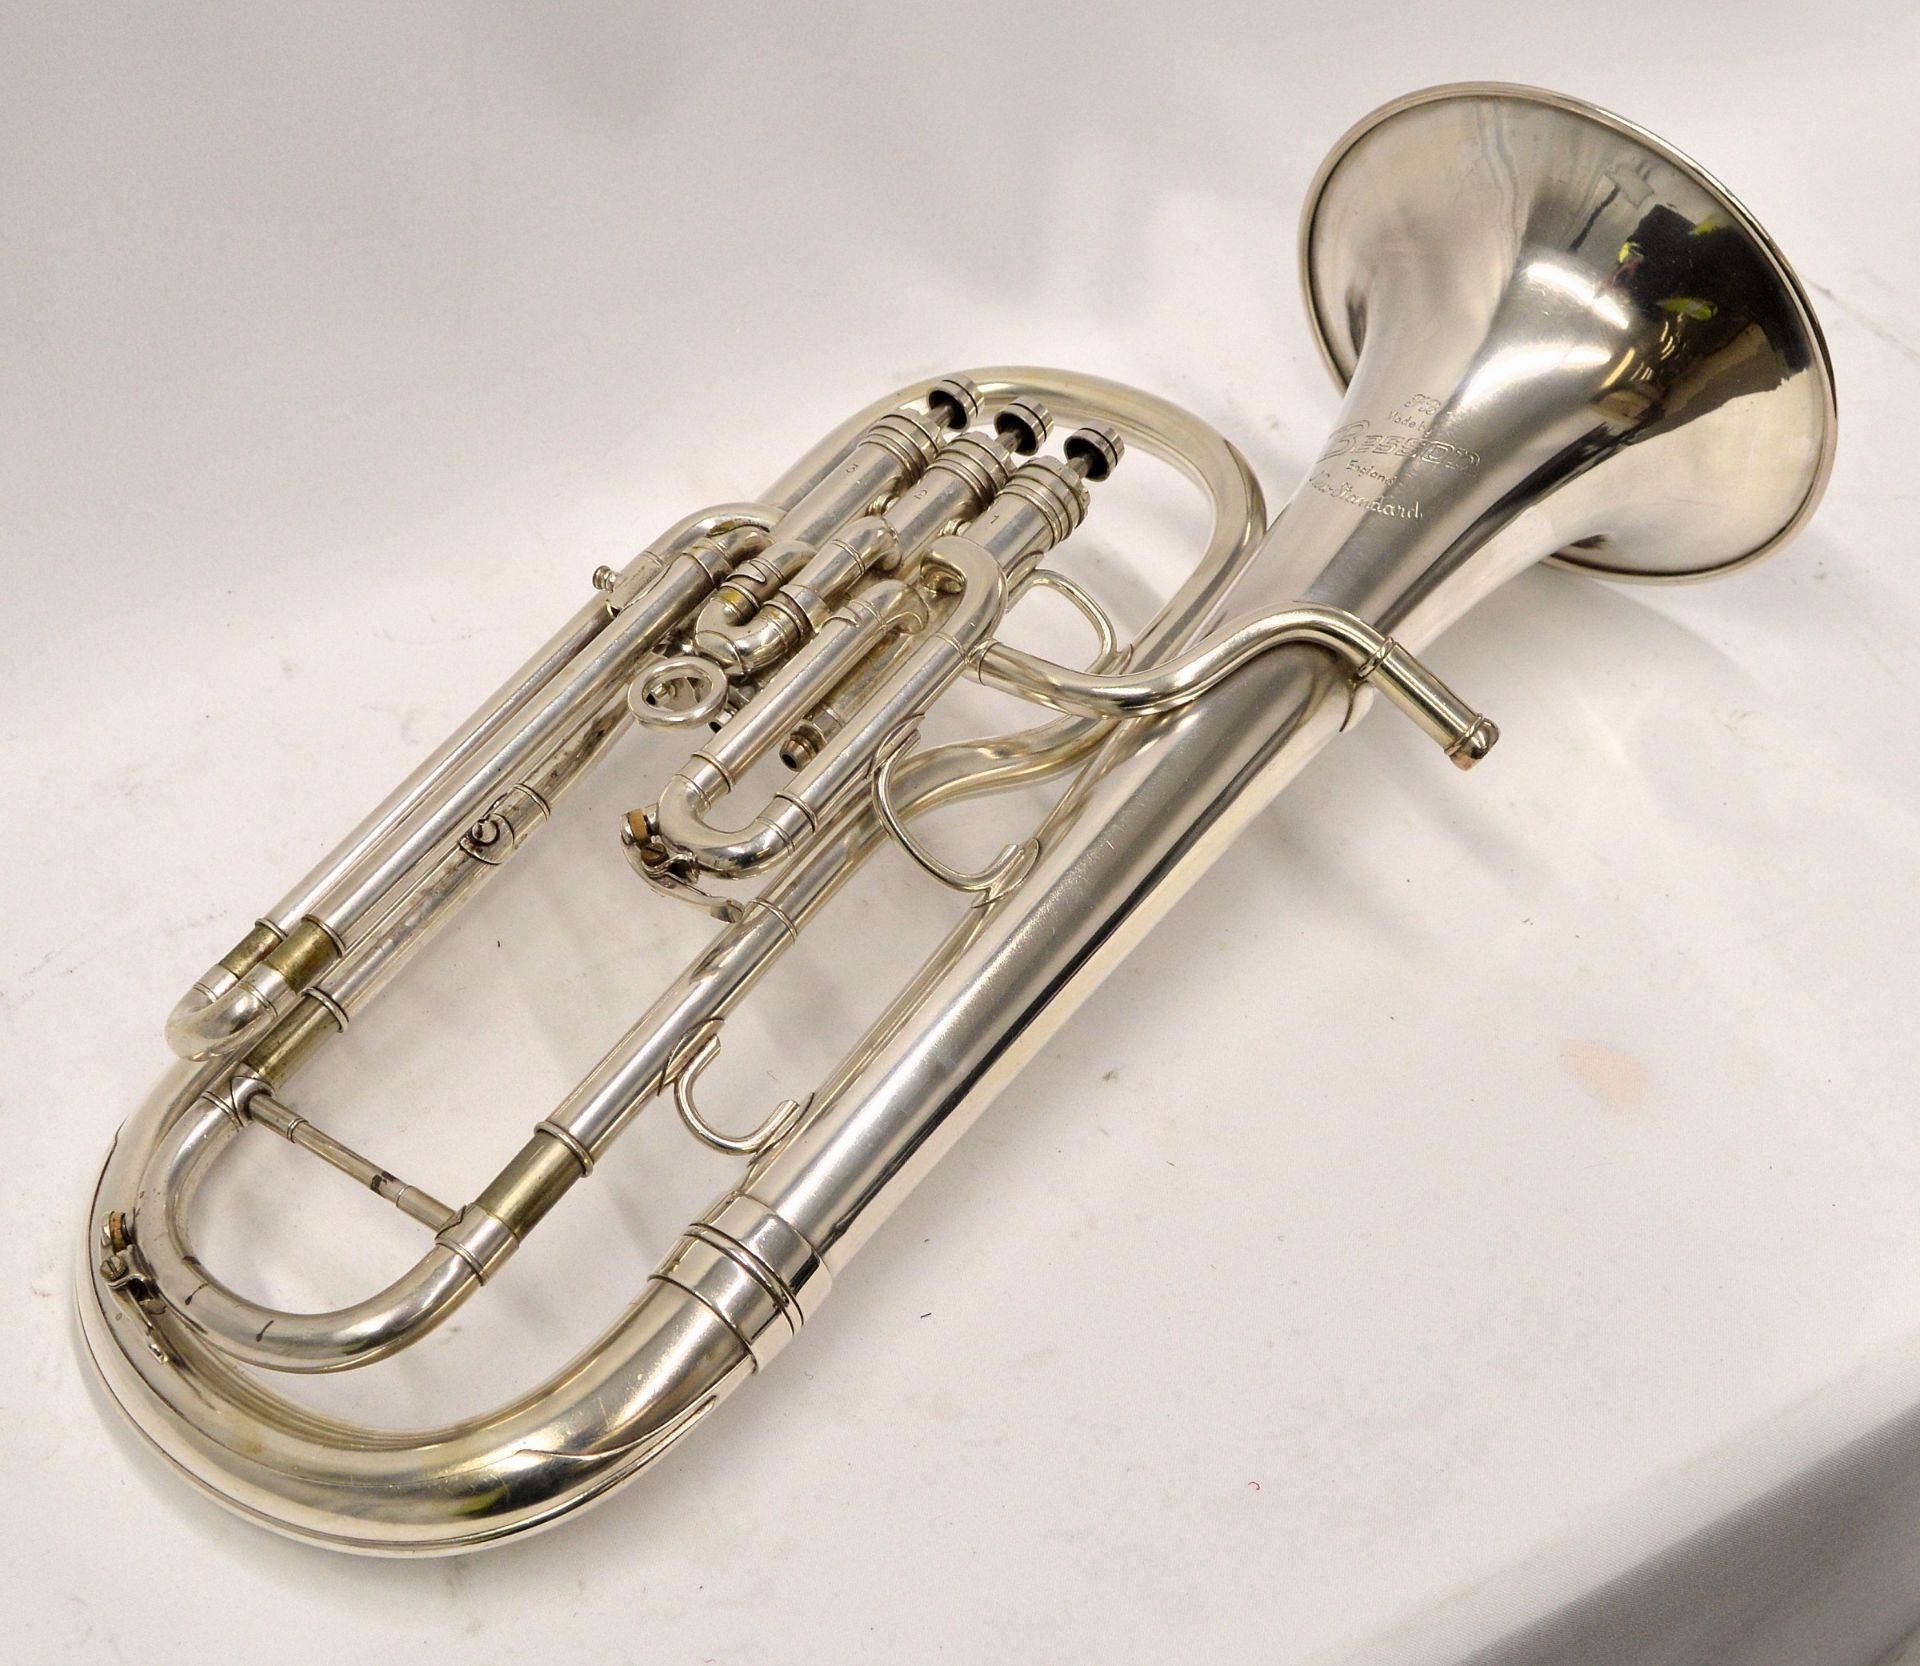 Besson Tenor Horn with Case. Serial No. 539743. - Image 3 of 14